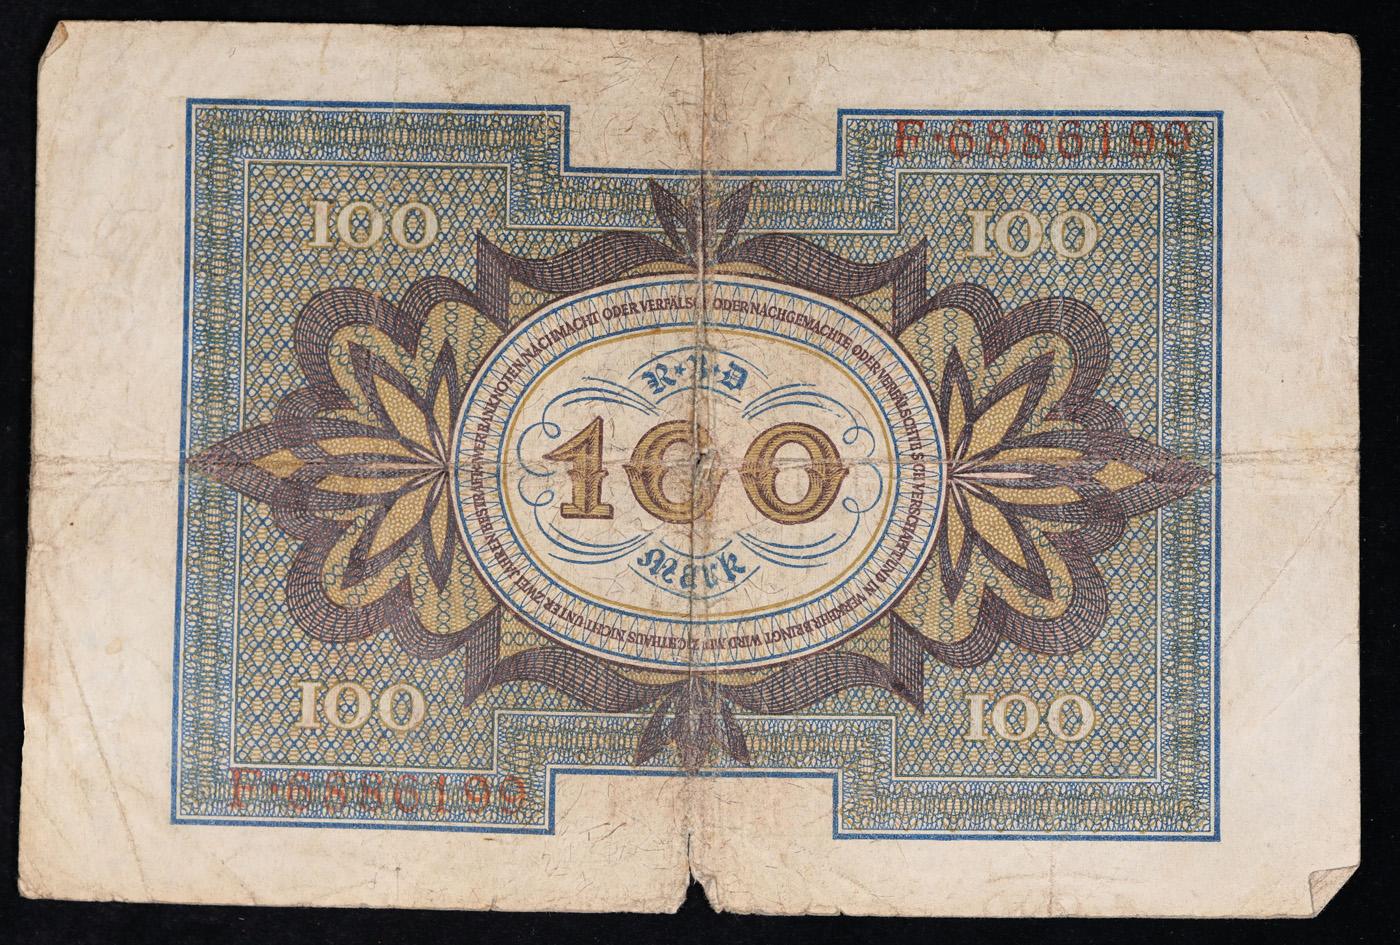 1920 Germany (Weimar) 100 Marks Banknote P# 69a Grades vf+